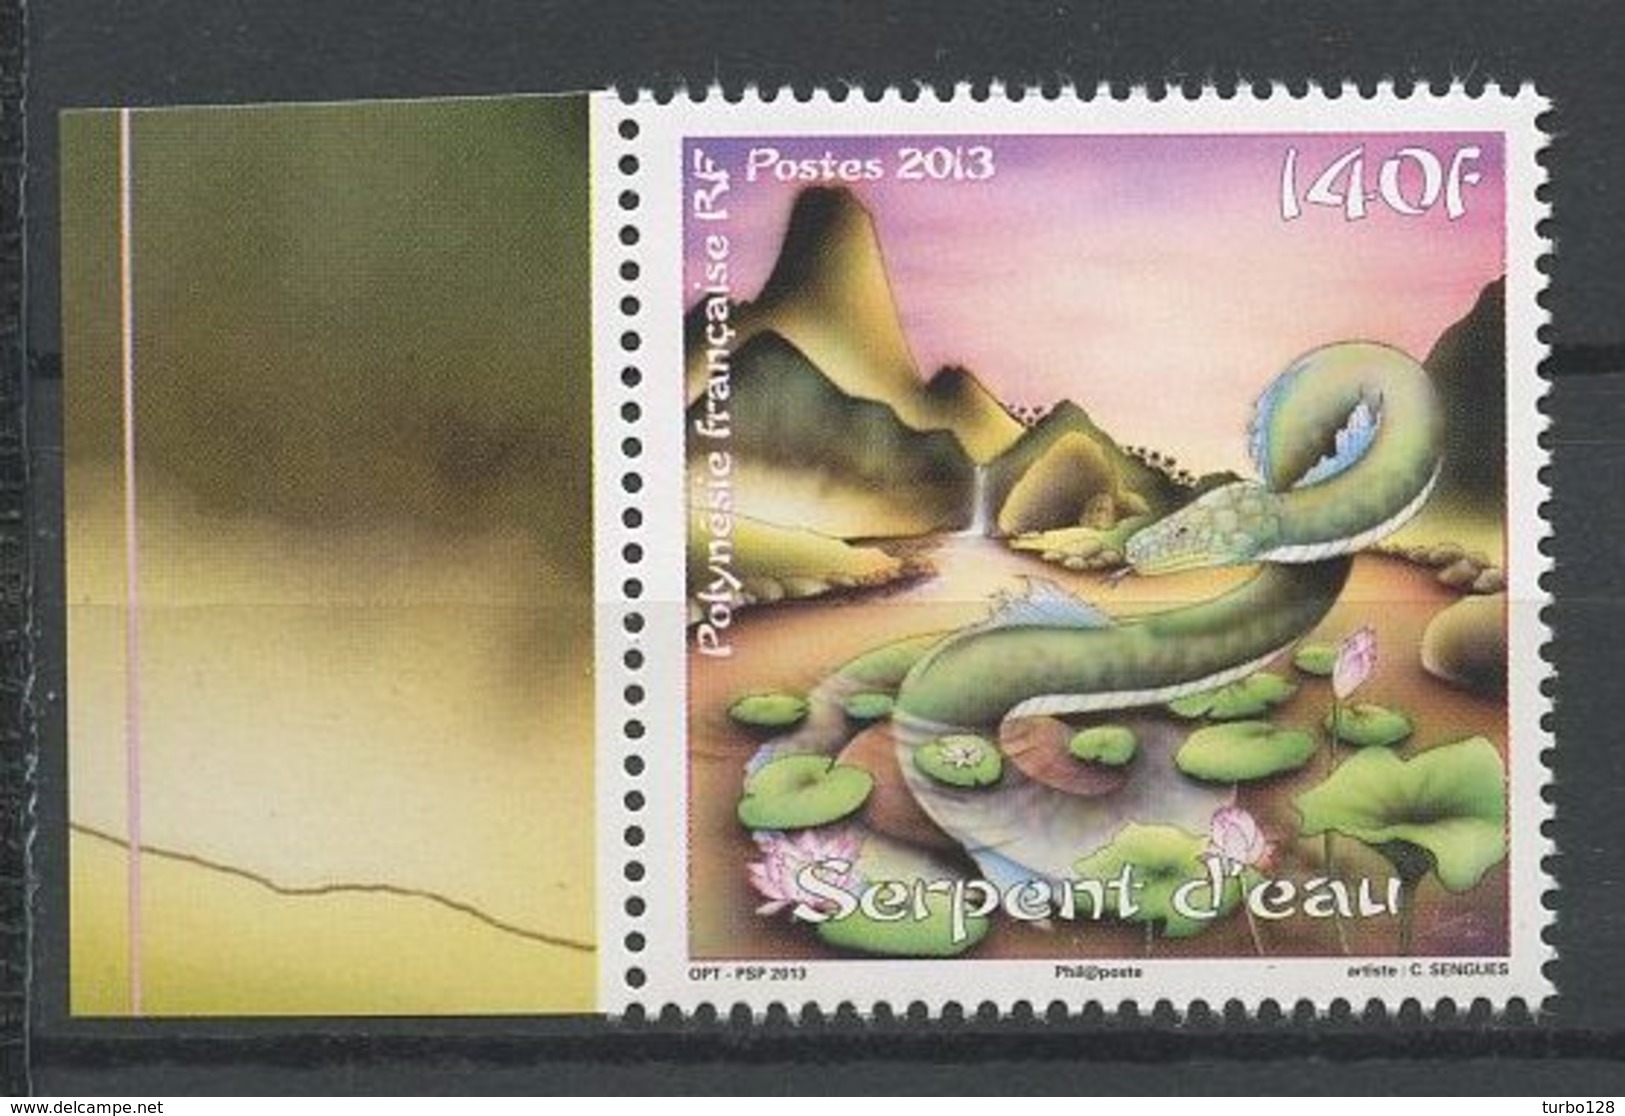 POLYNESIE 2013 N° 1015 ** Neuf  = MNH Superbe Année Lunaire Chinoise Serpent Faune Reptiles Fauna Animaux - Unused Stamps